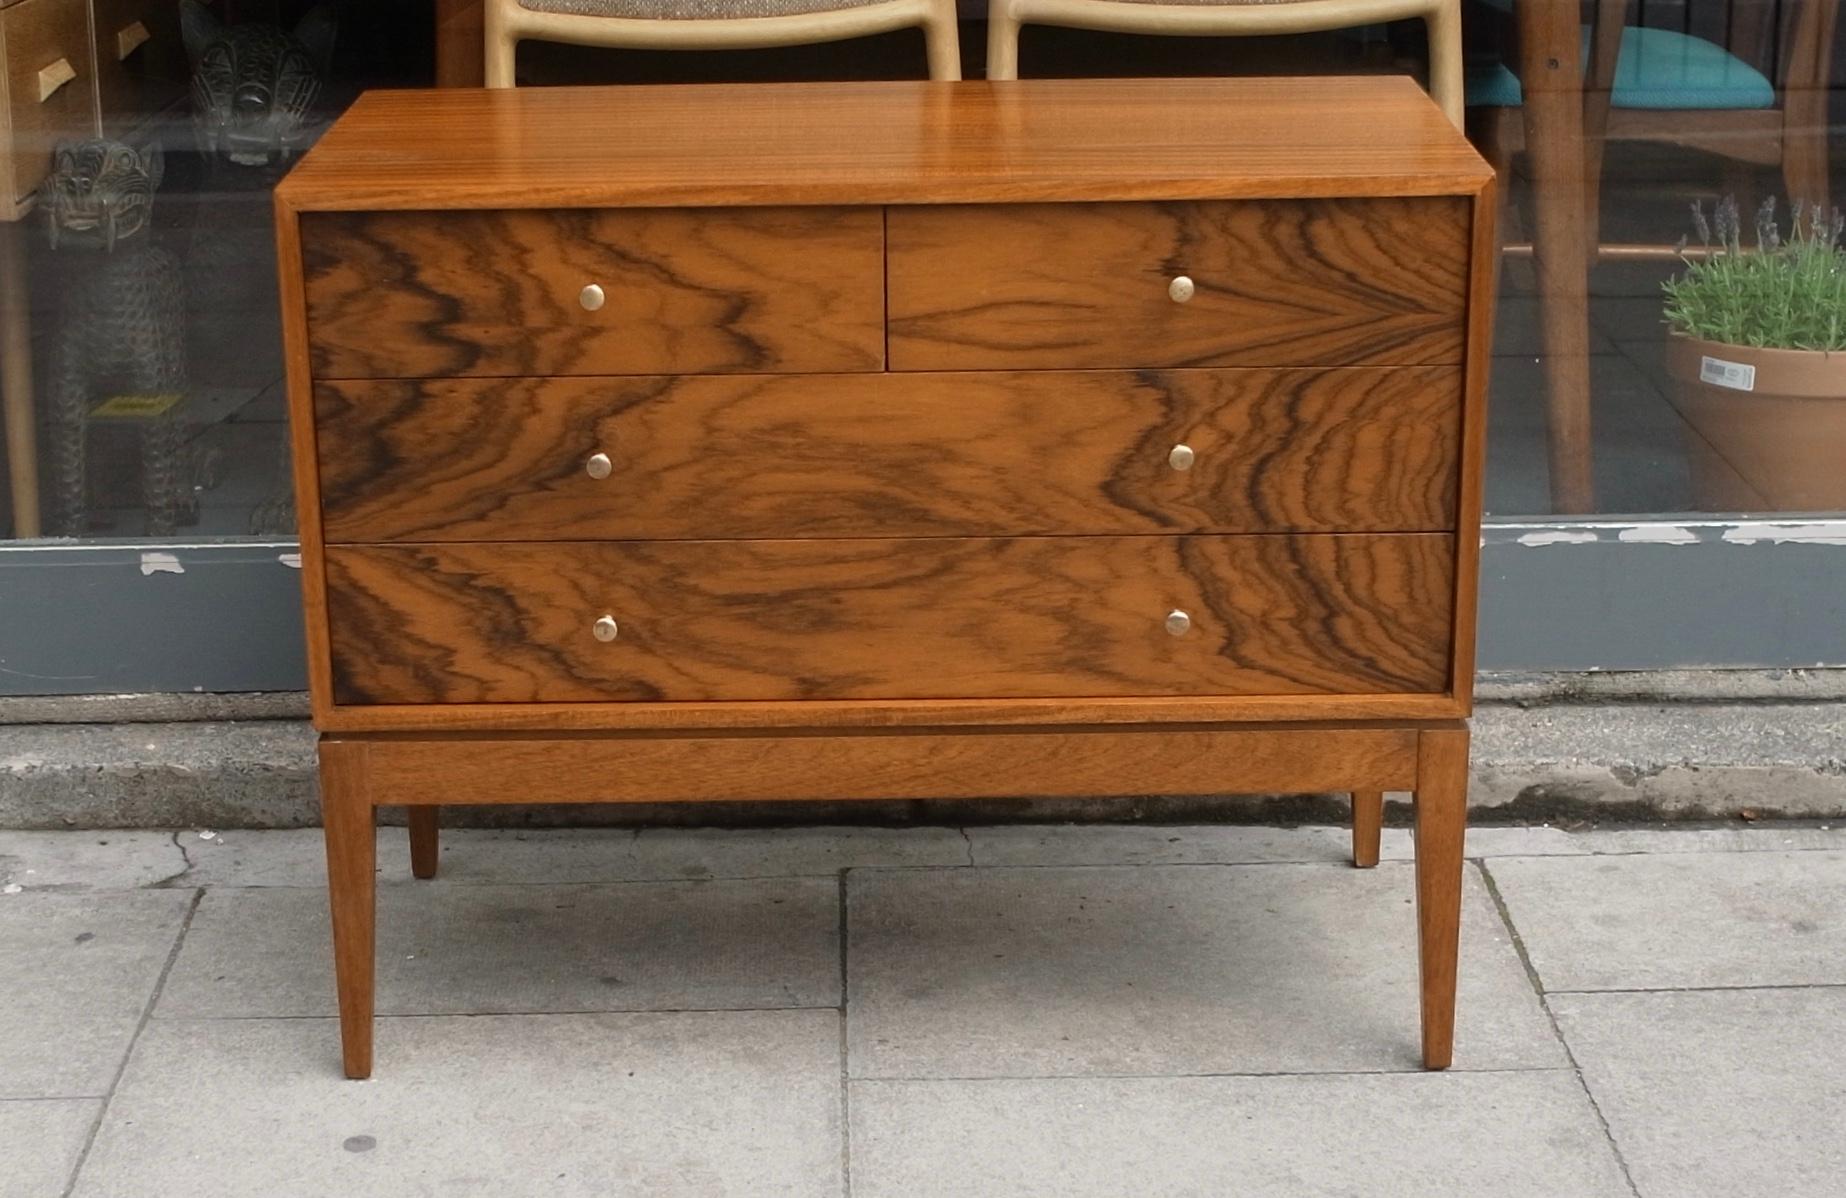 A very beautiful, and stylish vintage Mahogany and Indian Blackwood British made 1960s chests of drawers, set on solid Mahogany tapered legs. This chests of drawers designed by Peter Hayward and produced by Uniflex, incorporates two small Indian